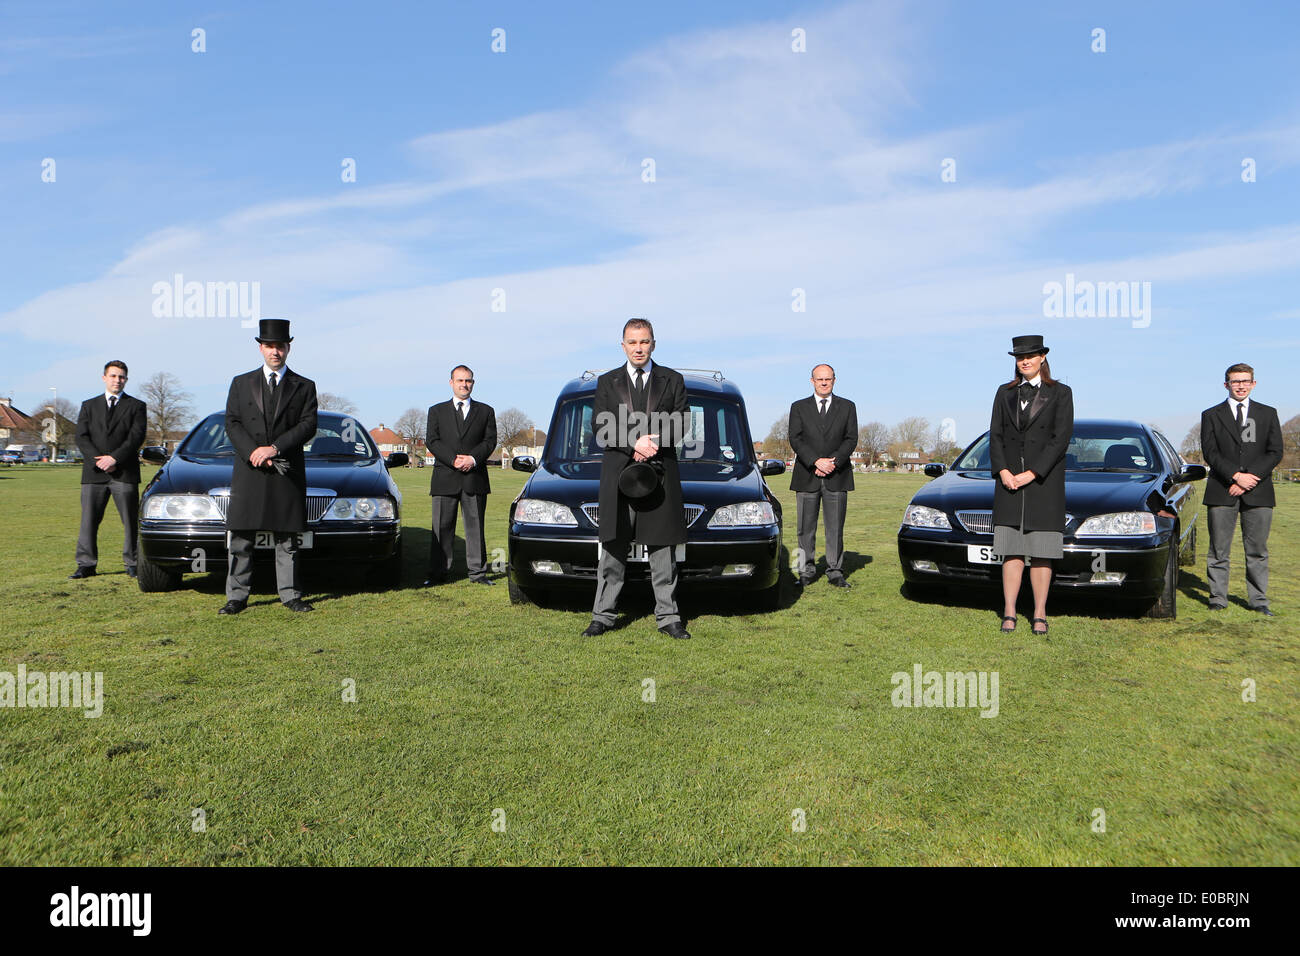 Funeral directors and cars Stock Photo